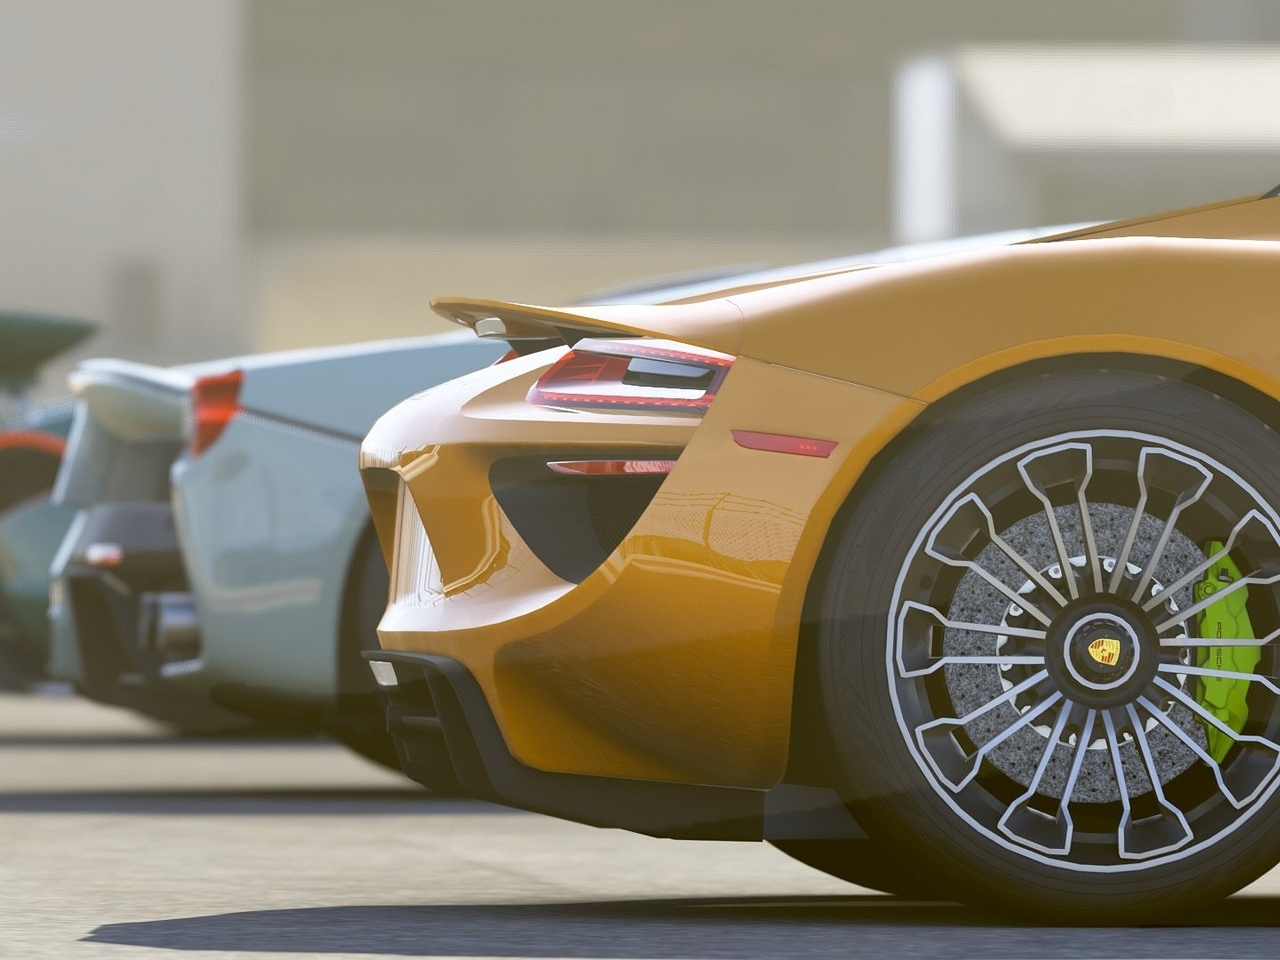 Image: Supercars, wheel, rear part, bumpers, spoilers, shadow, racing, competition